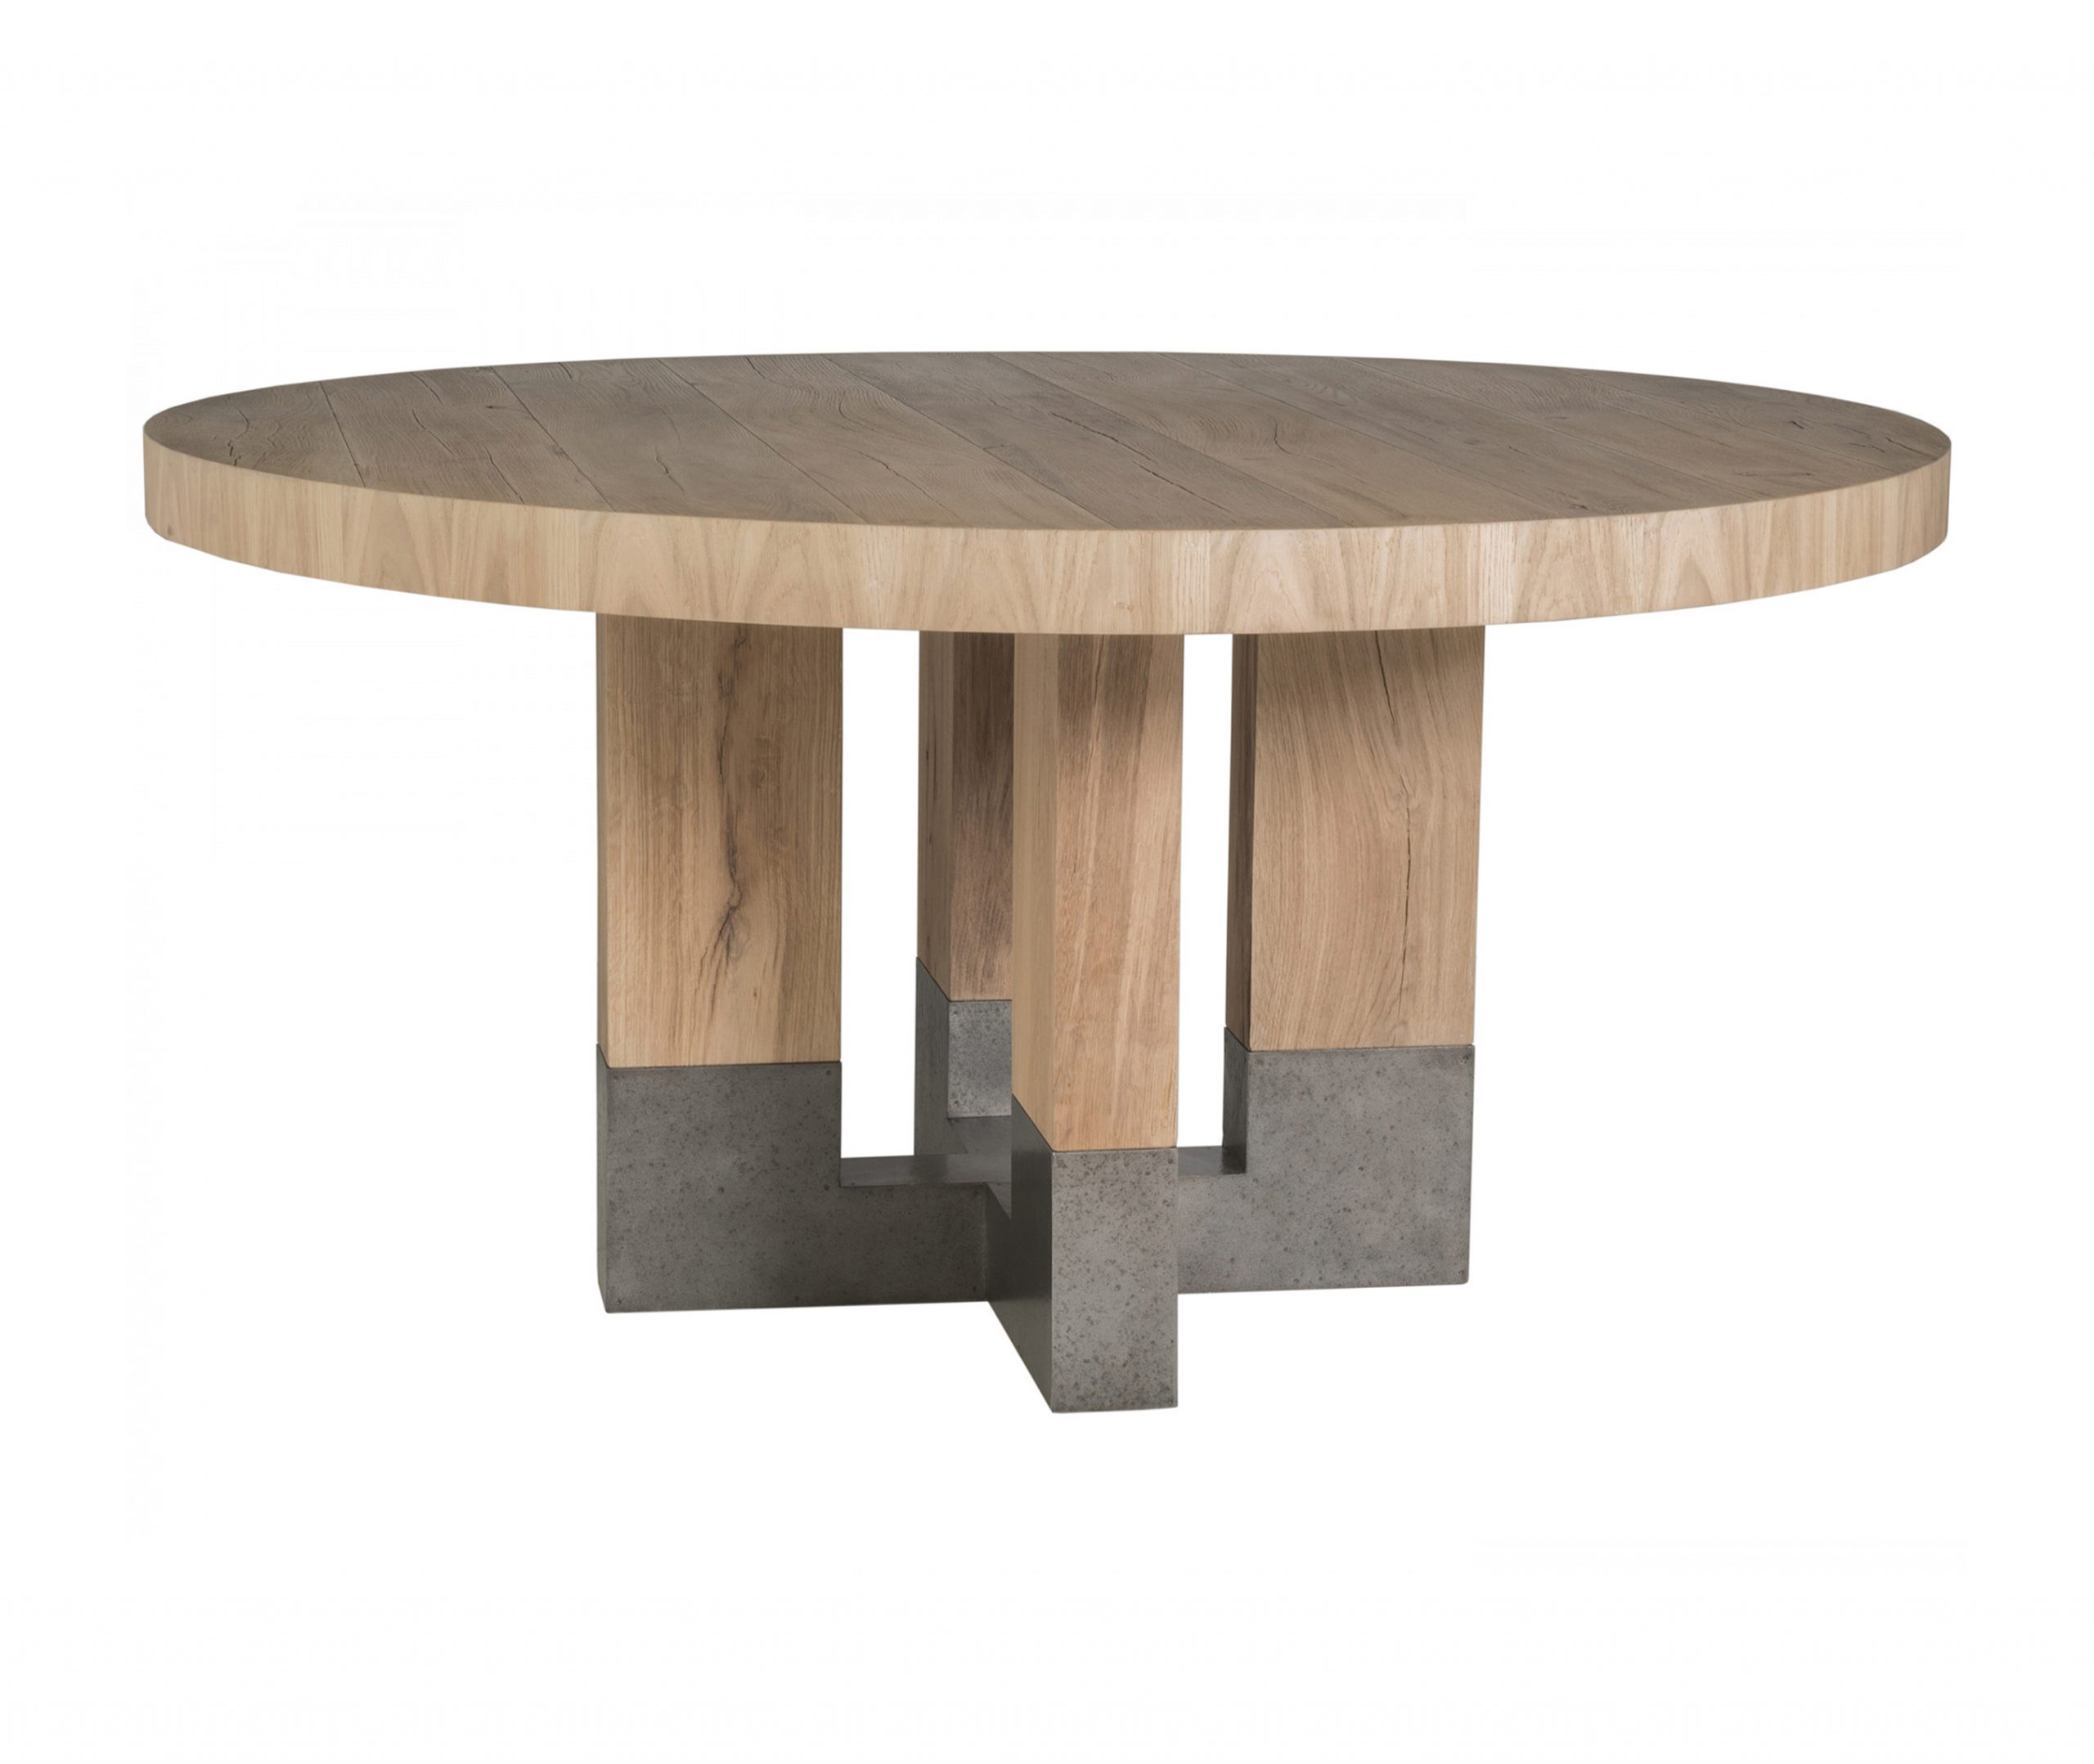 Lexington-Home-Brands_Verite-Round-Dining-Table-1_int_products-scaled-1